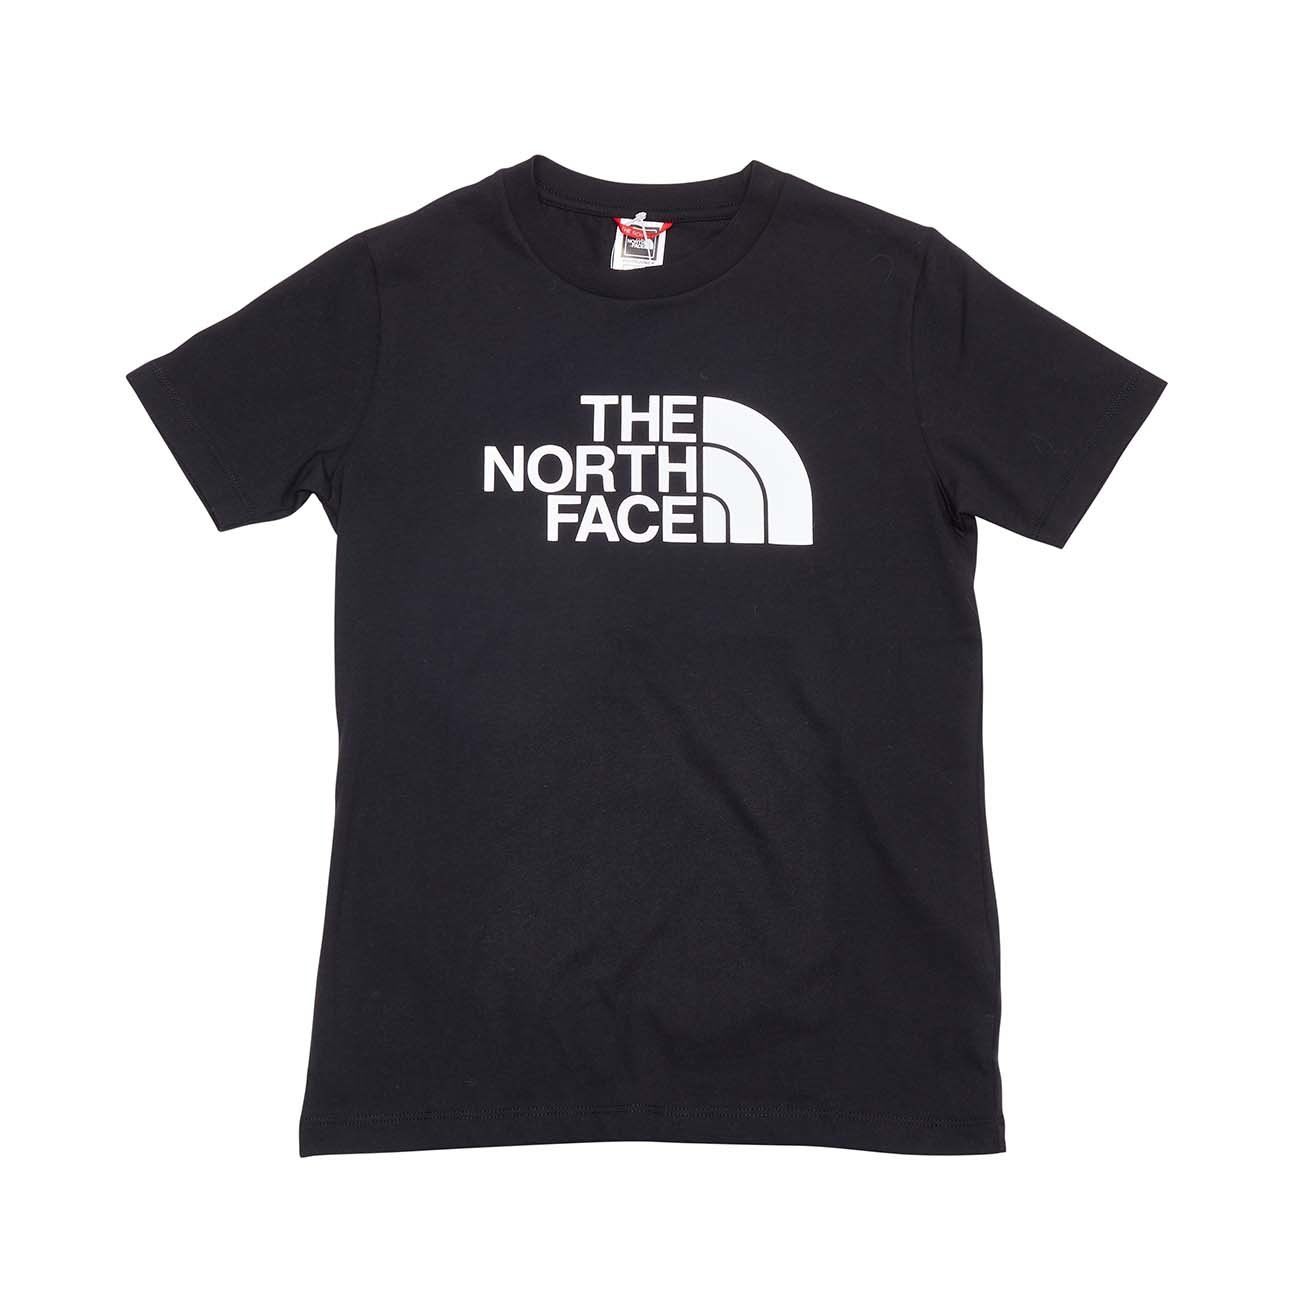 LOGO THE | White Kid NORTH FACE EASY Store T-SHIRT Mascheroni WITH Black